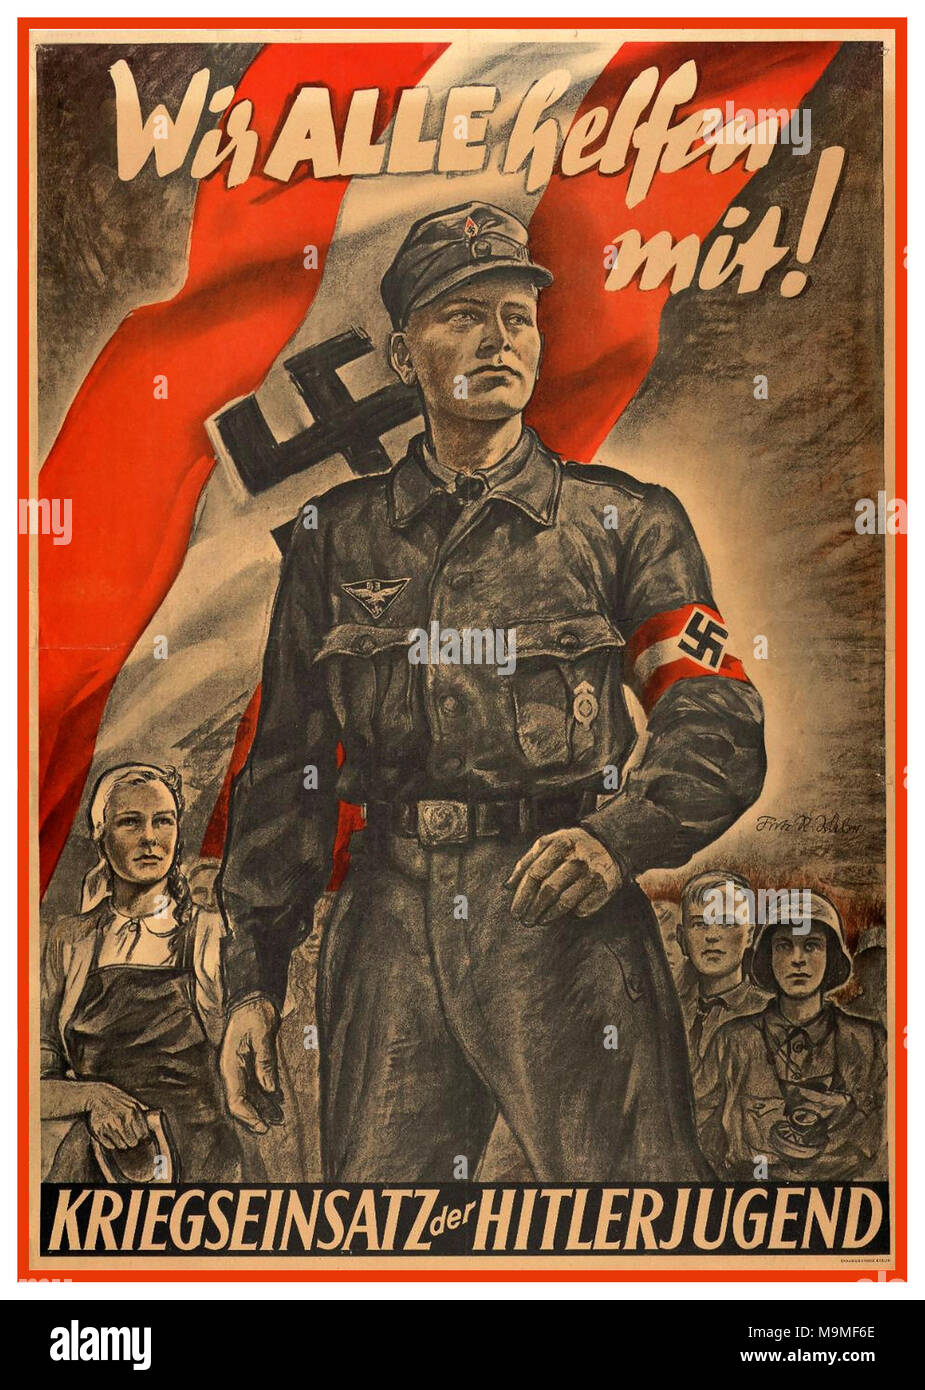 WW2 Nazi Germany HITLERJUGEND Propaganda 1944-45 ‘We all help with...War efforts of the Hitler Youth’ Stock Photo